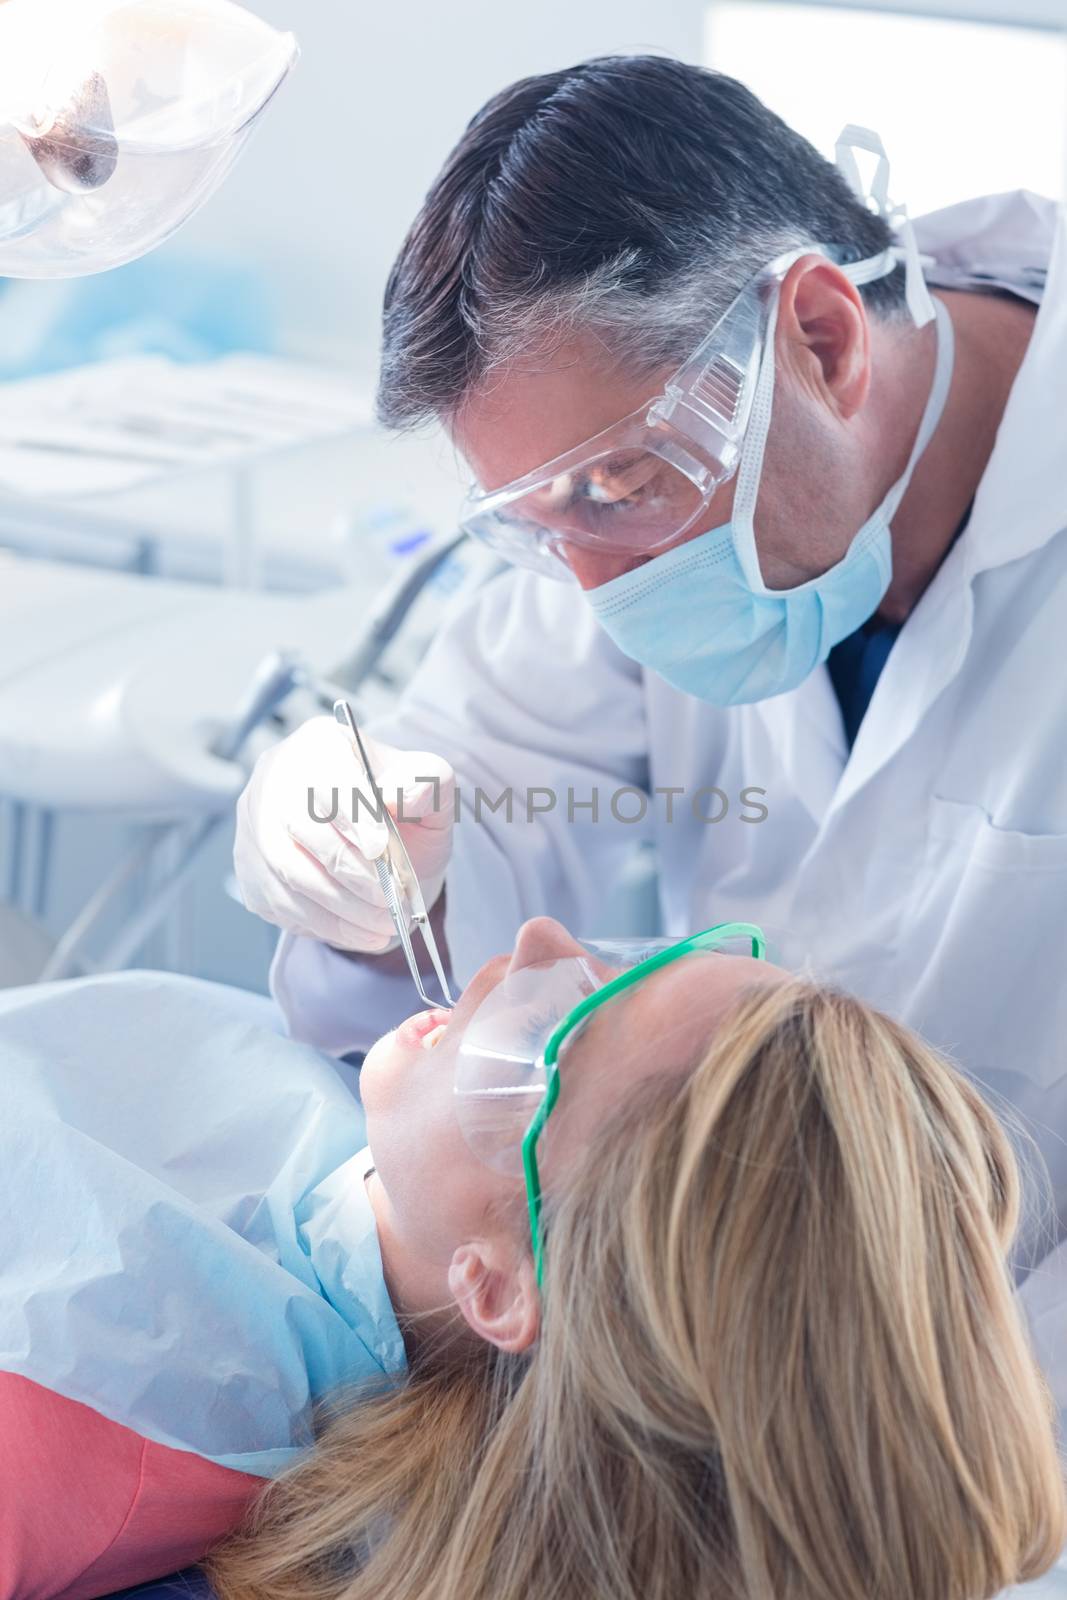 Dentist in surgical mask and gloves holding tool by Wavebreakmedia